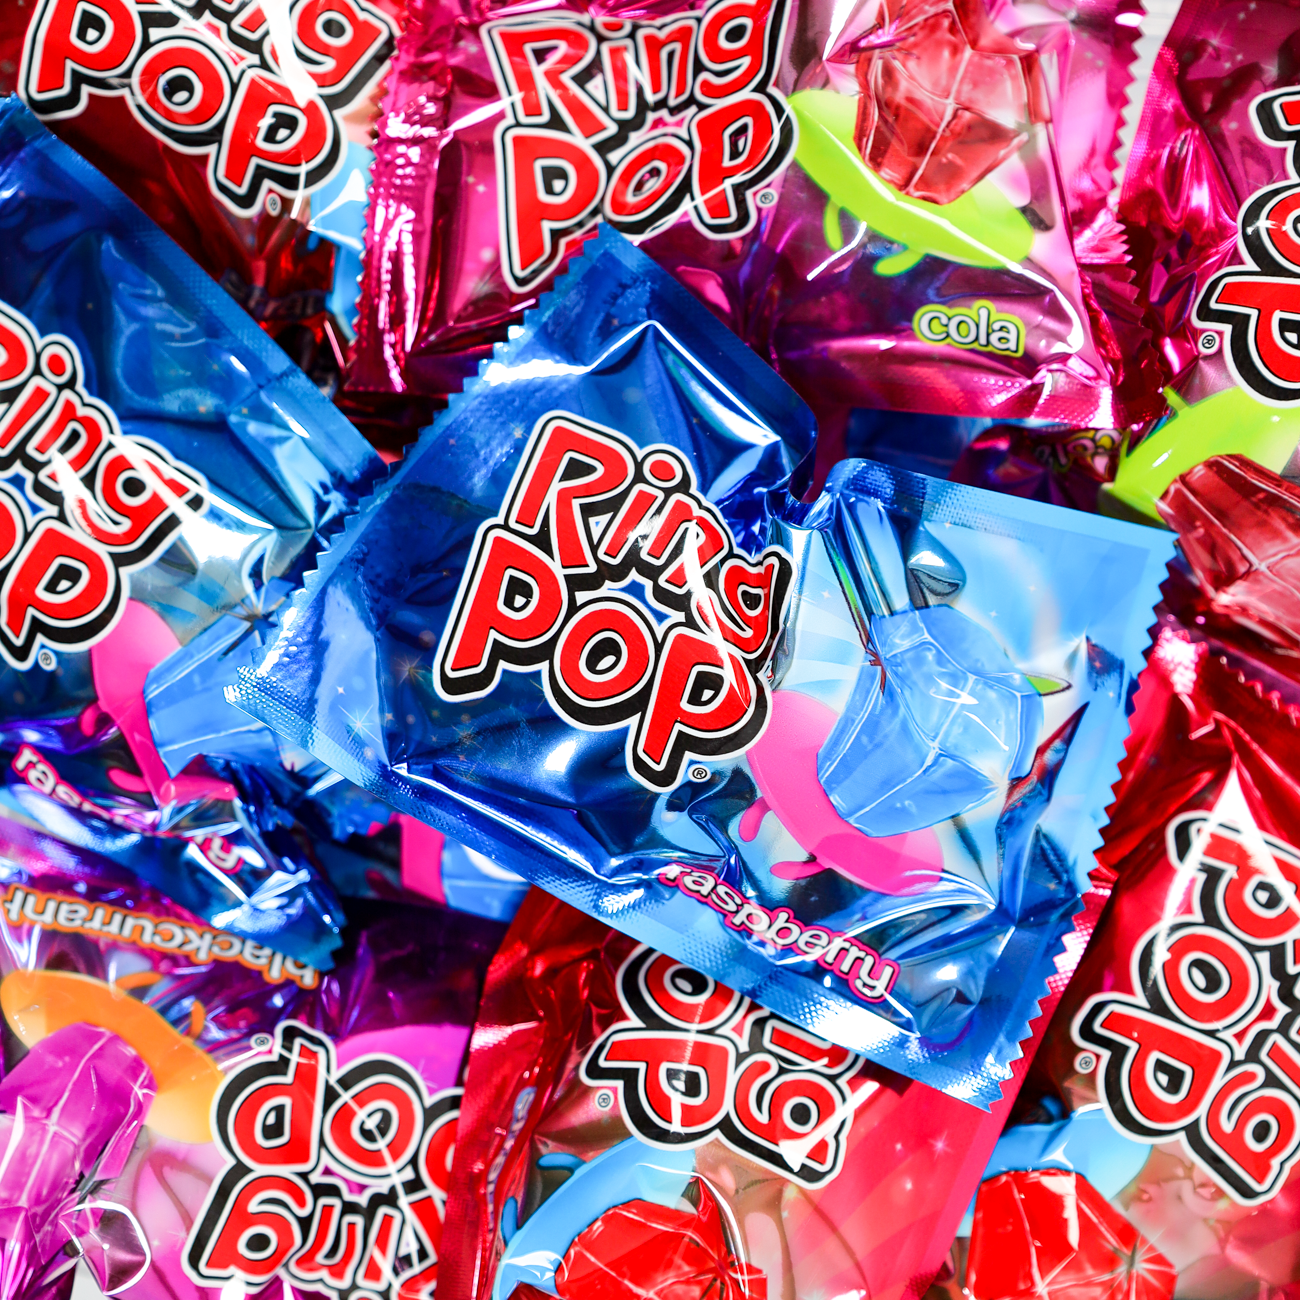 TOPPS Ring Pops Variety Pack | BJ's Wholesale Club